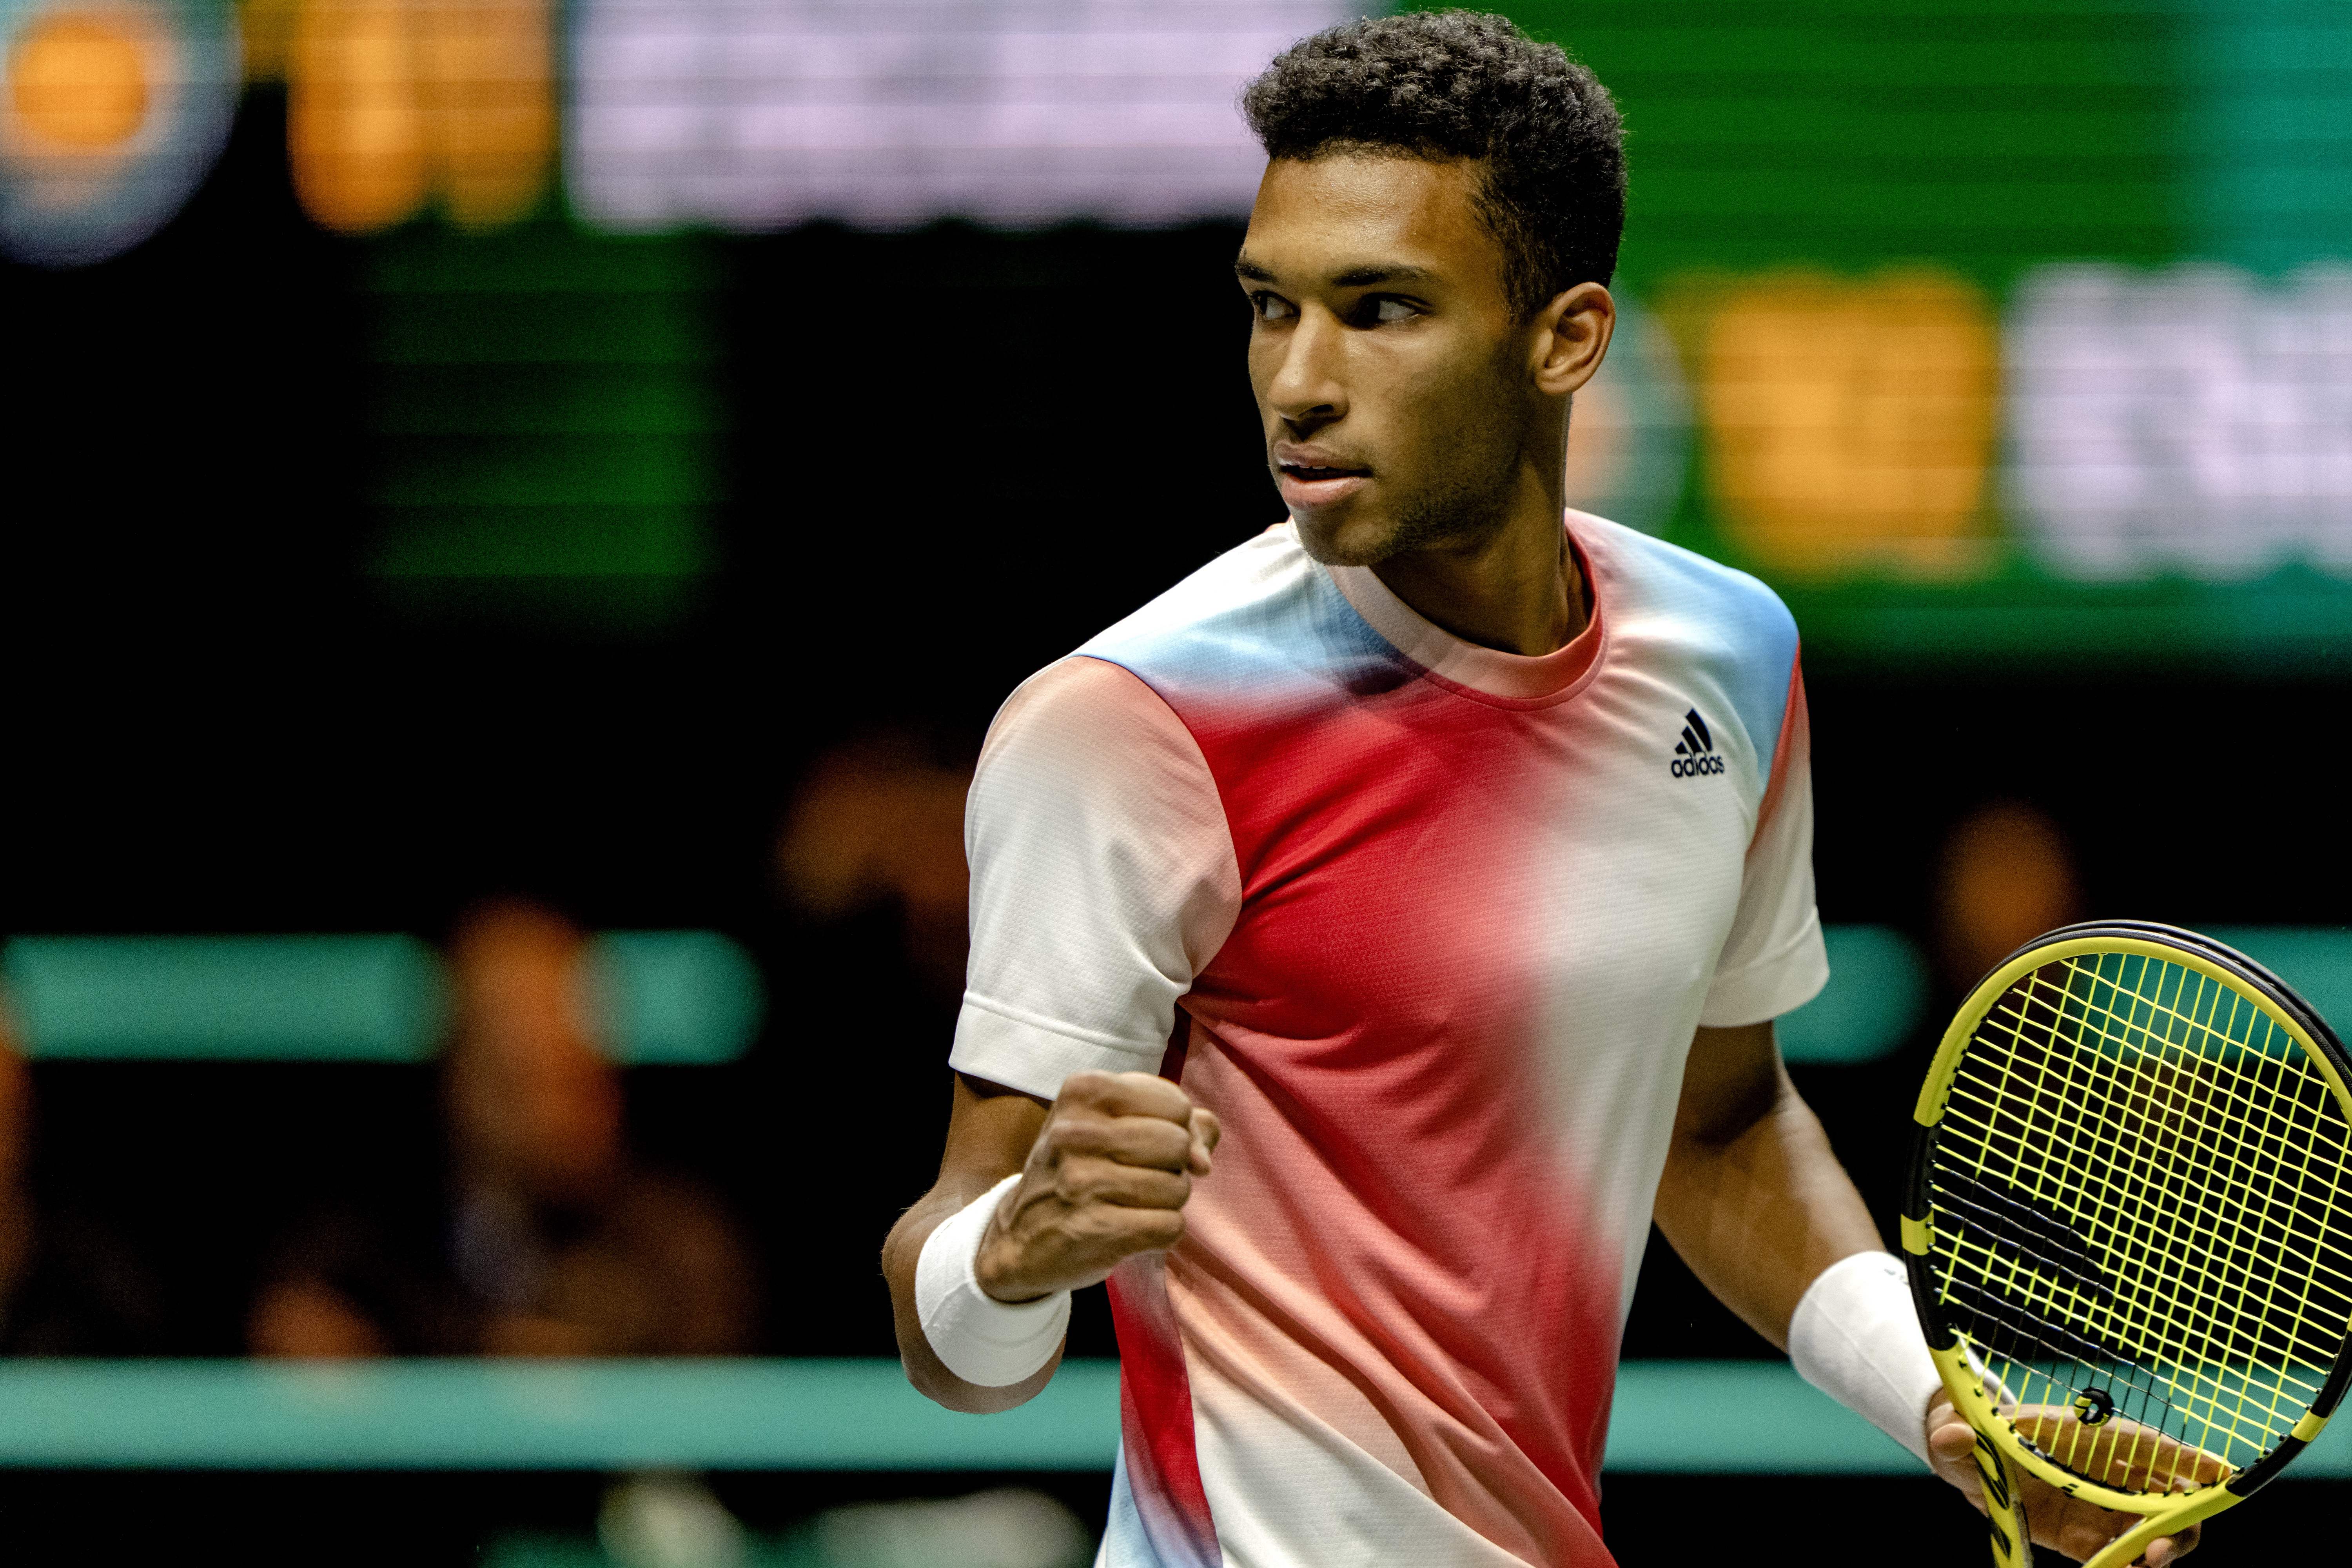 Weekend Winners First title in nine tries for Félix Auger-Aliassime; Anett Kontaveit continues indoor dominance